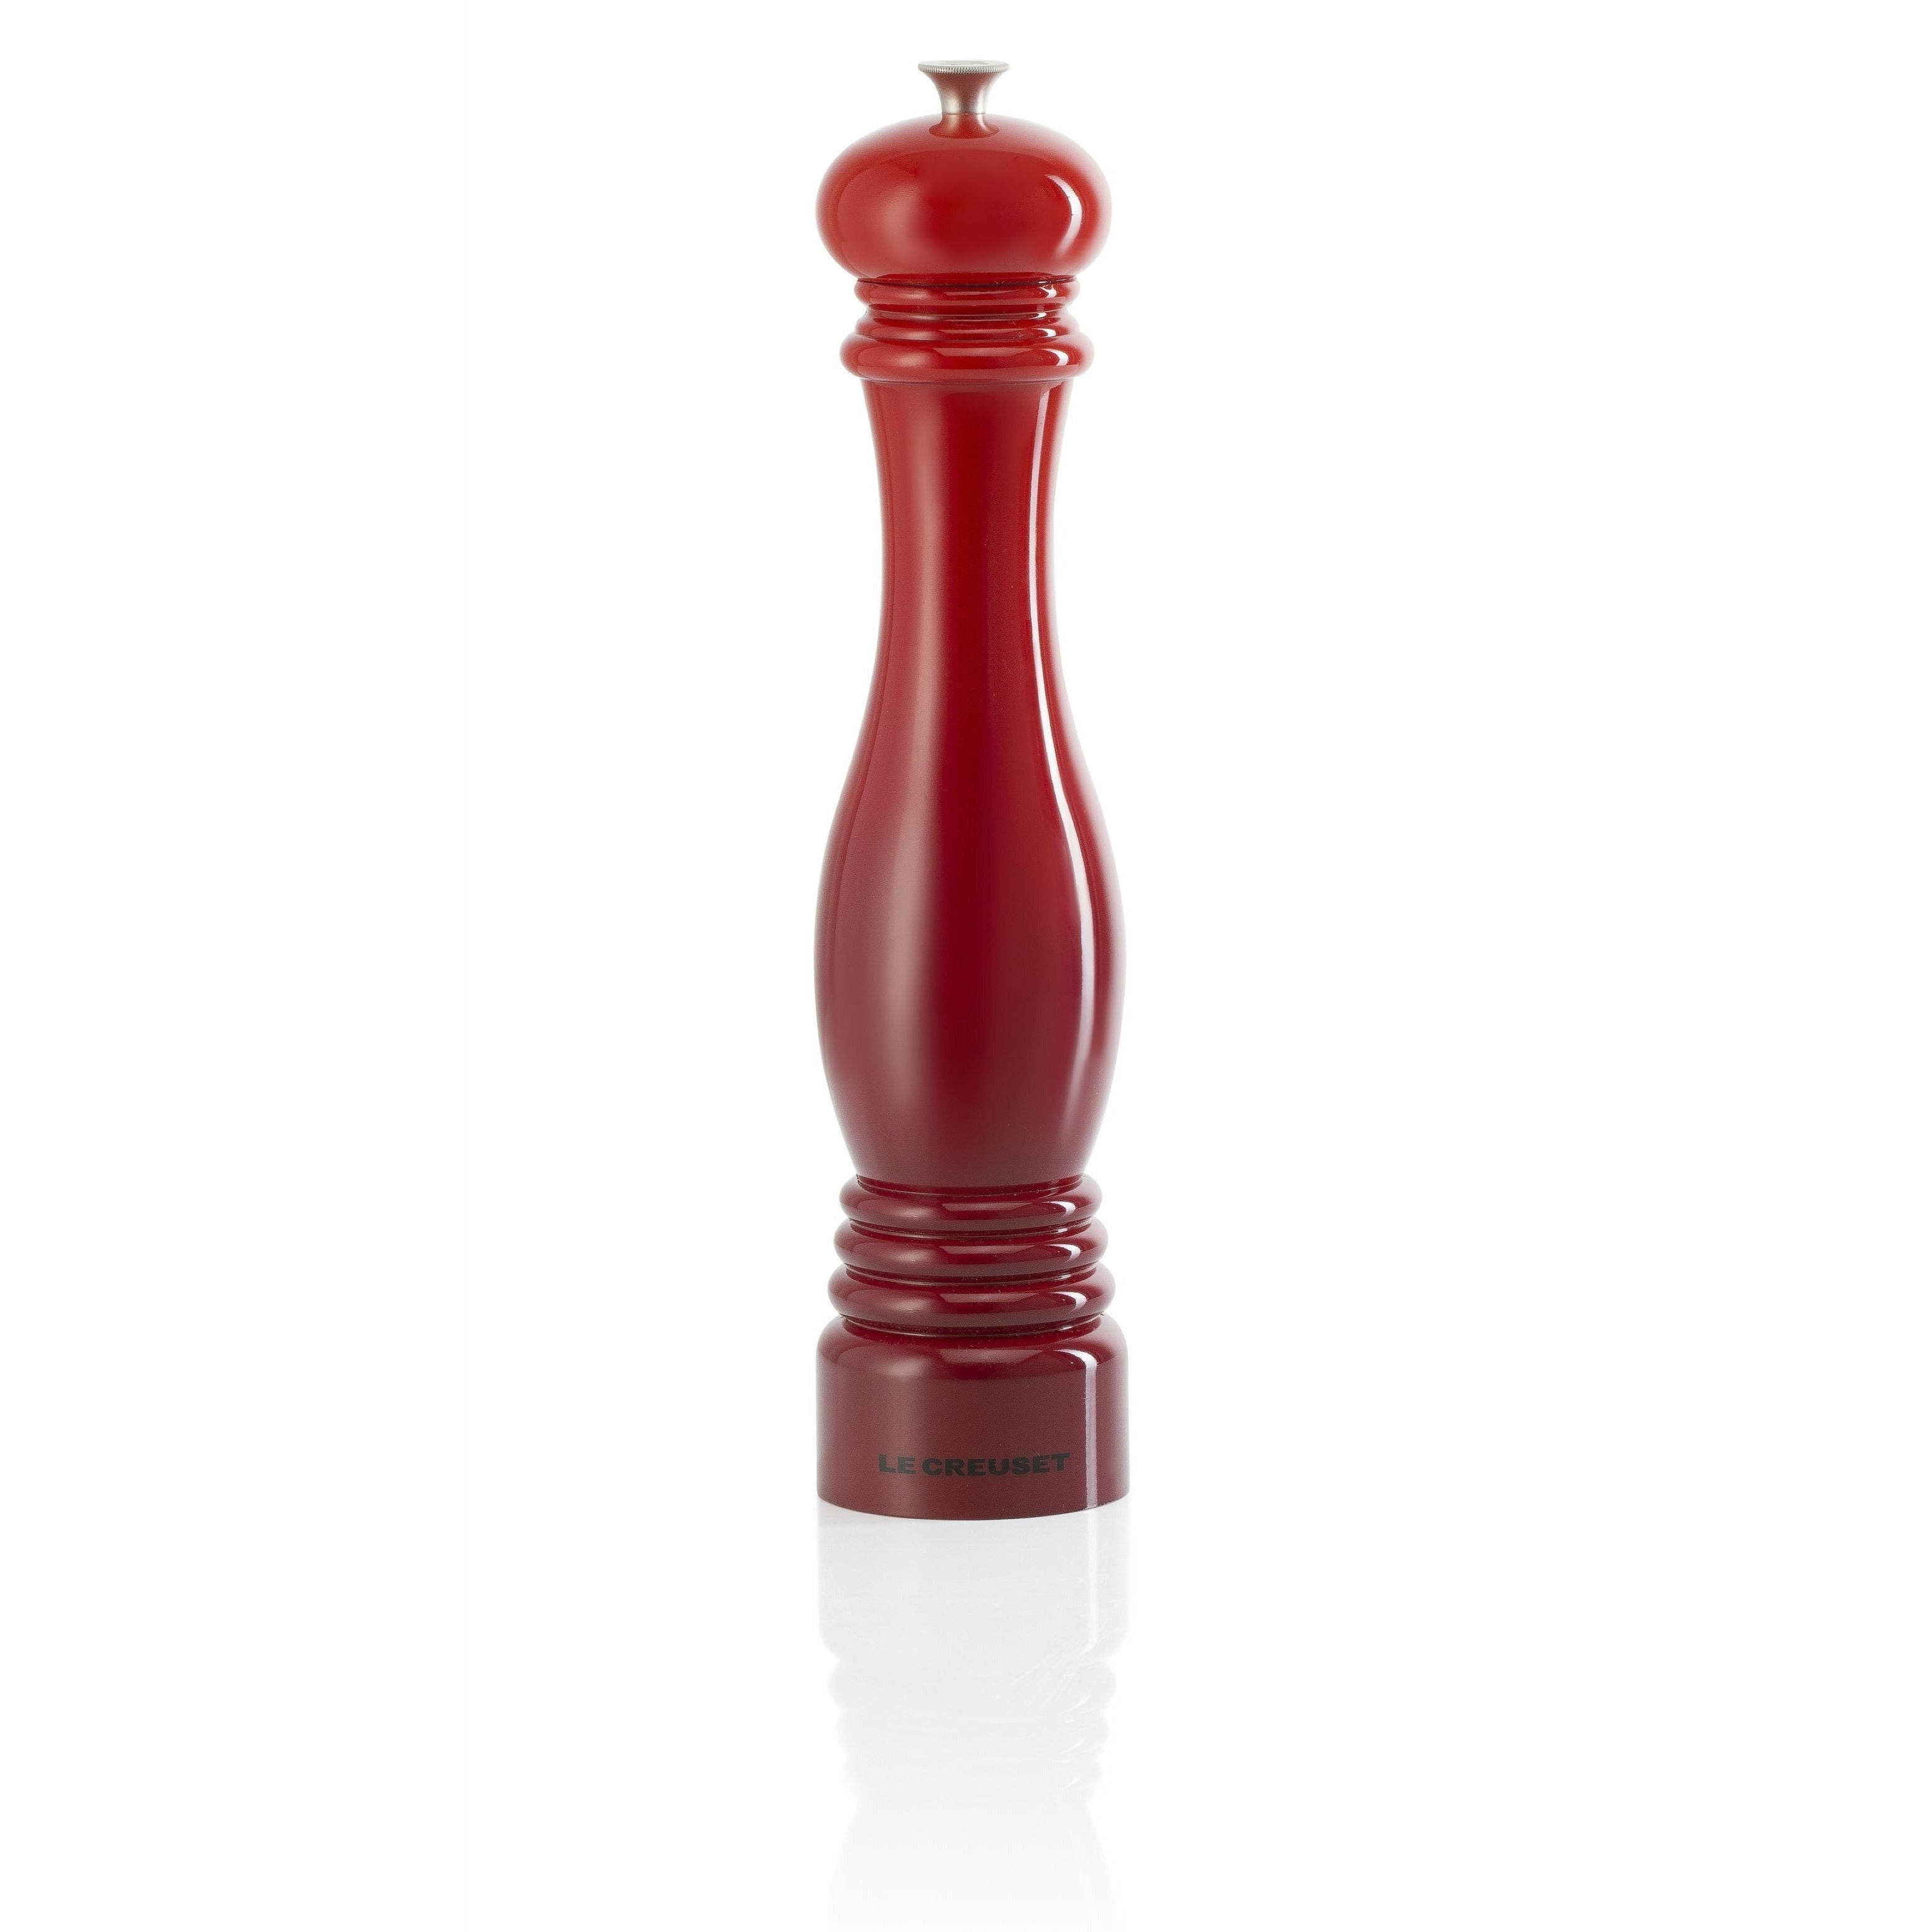 Le Creuset Pepper Mill 30 Cm, Cherry Red